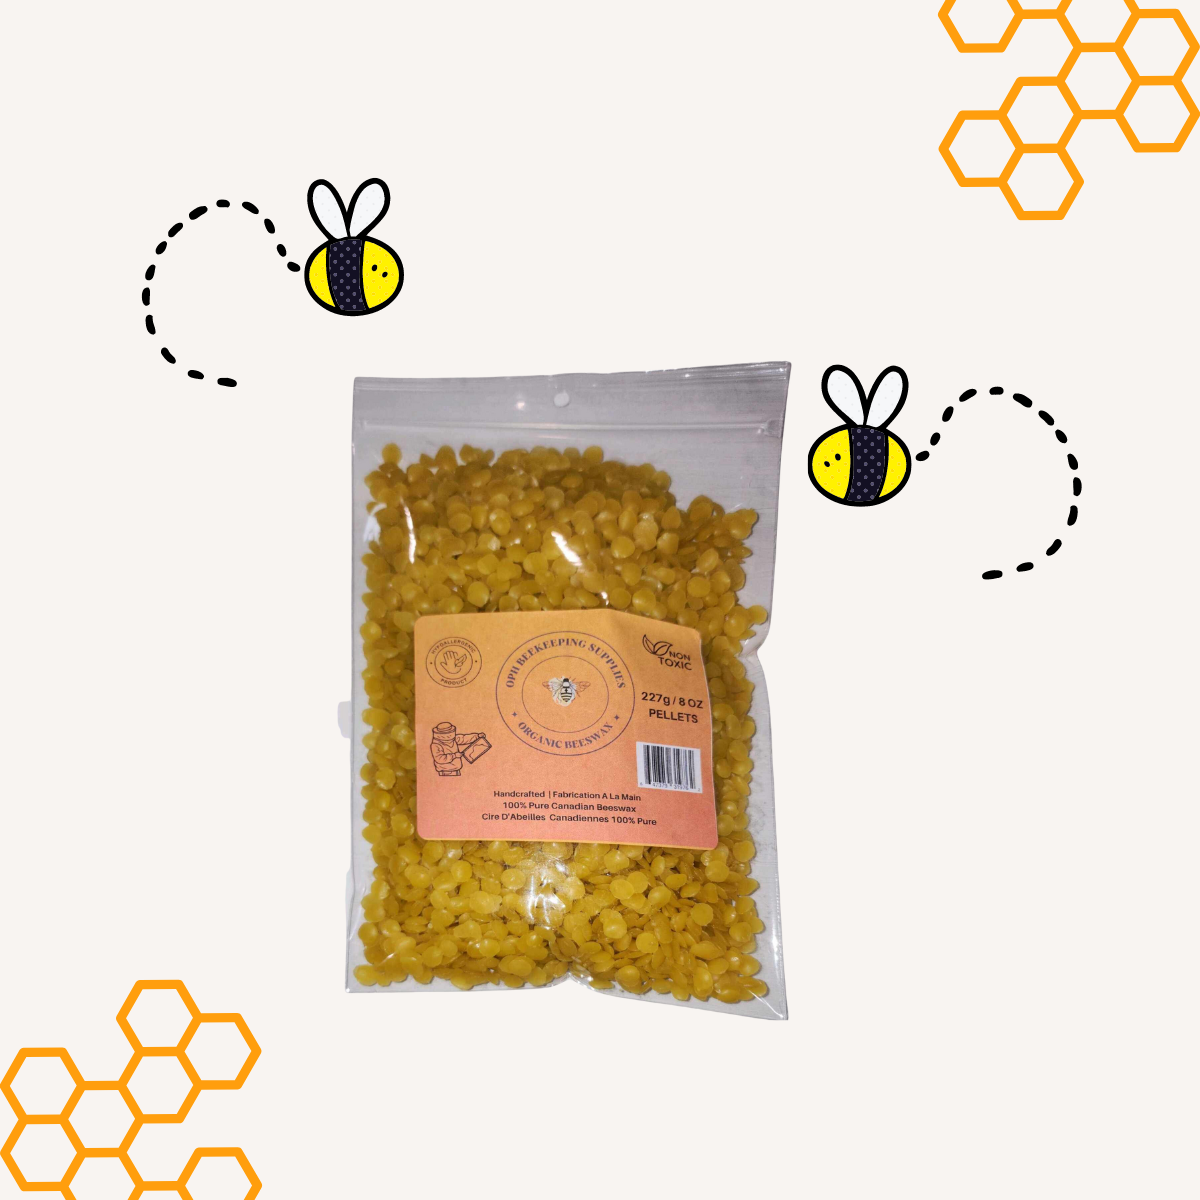 Beeswax Pellets (Golden) - 100% Natural - Easy Melt for Candle